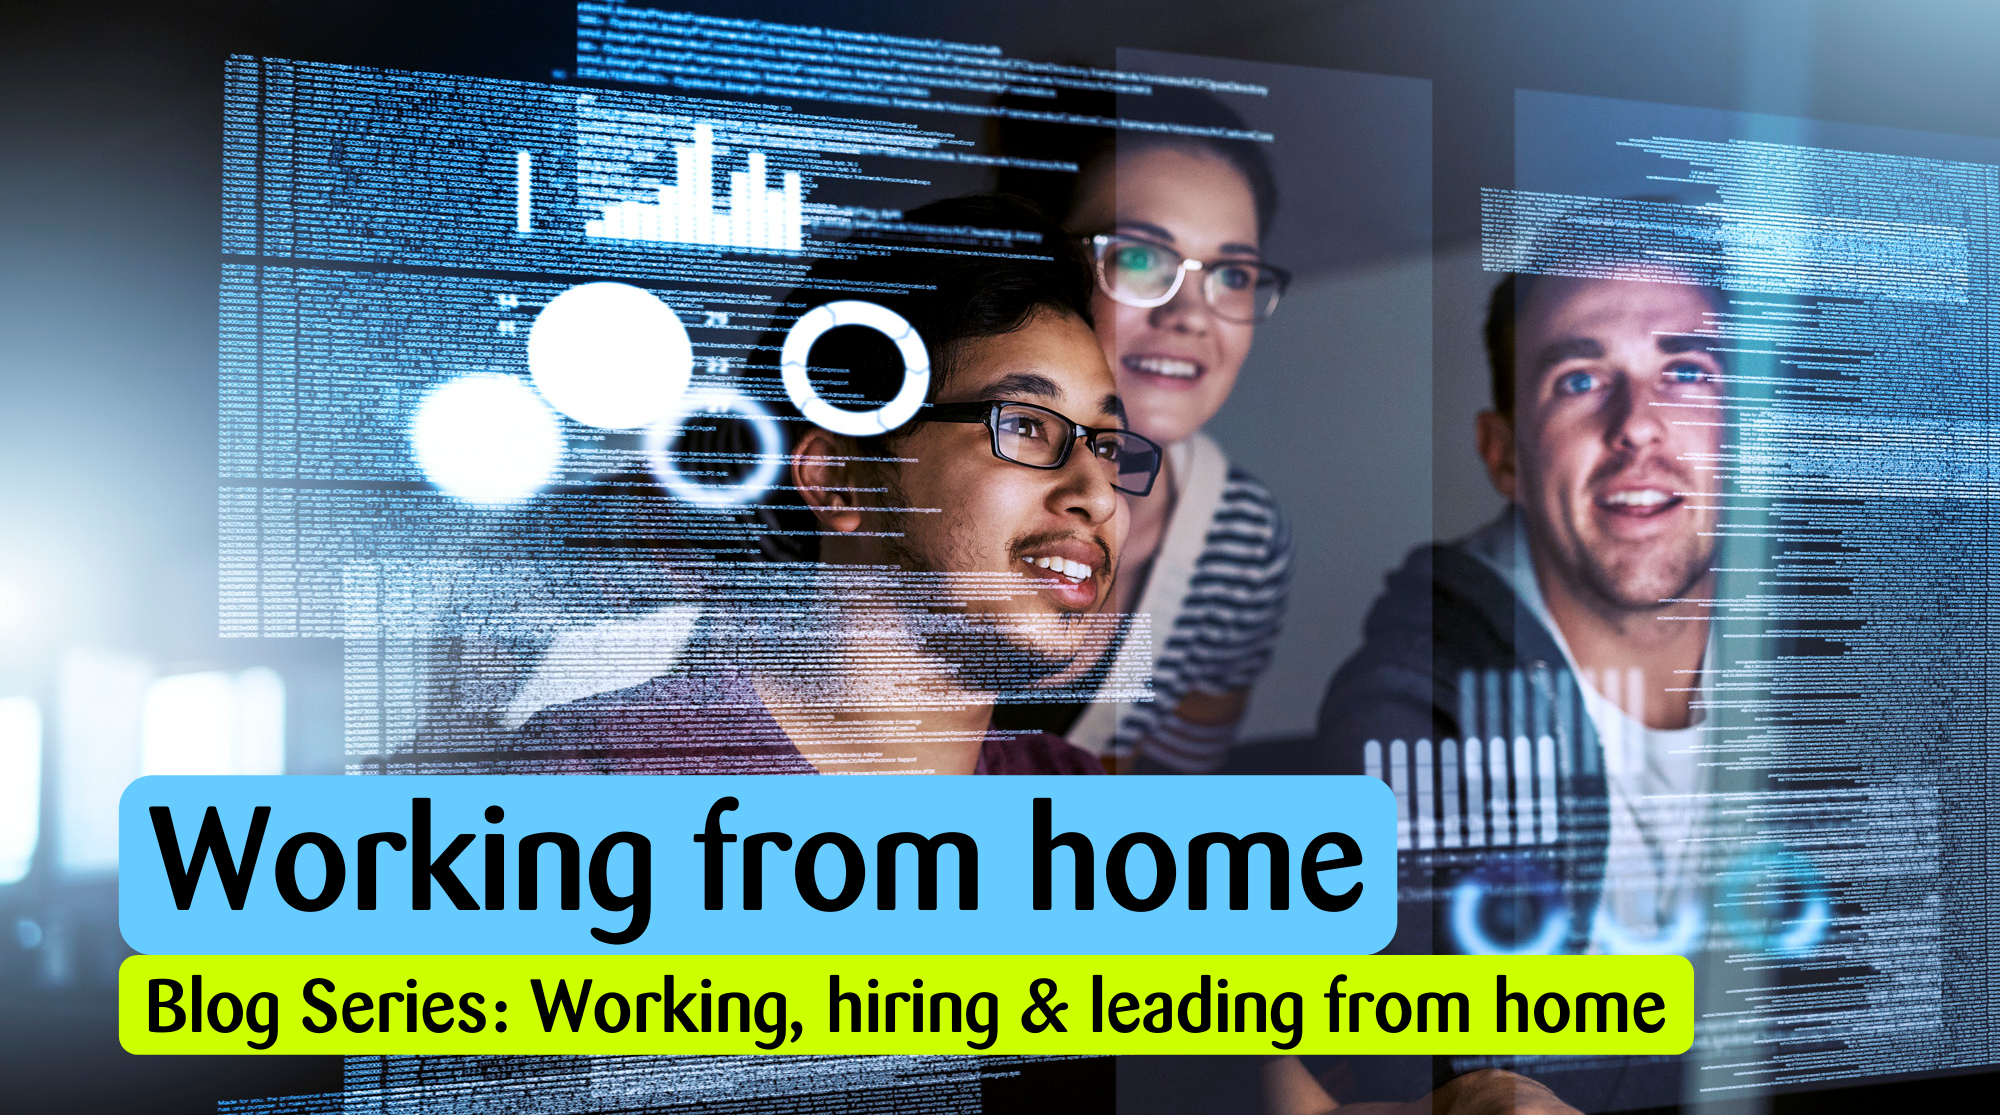 Working from home - blog series about working, hiring and leading from home